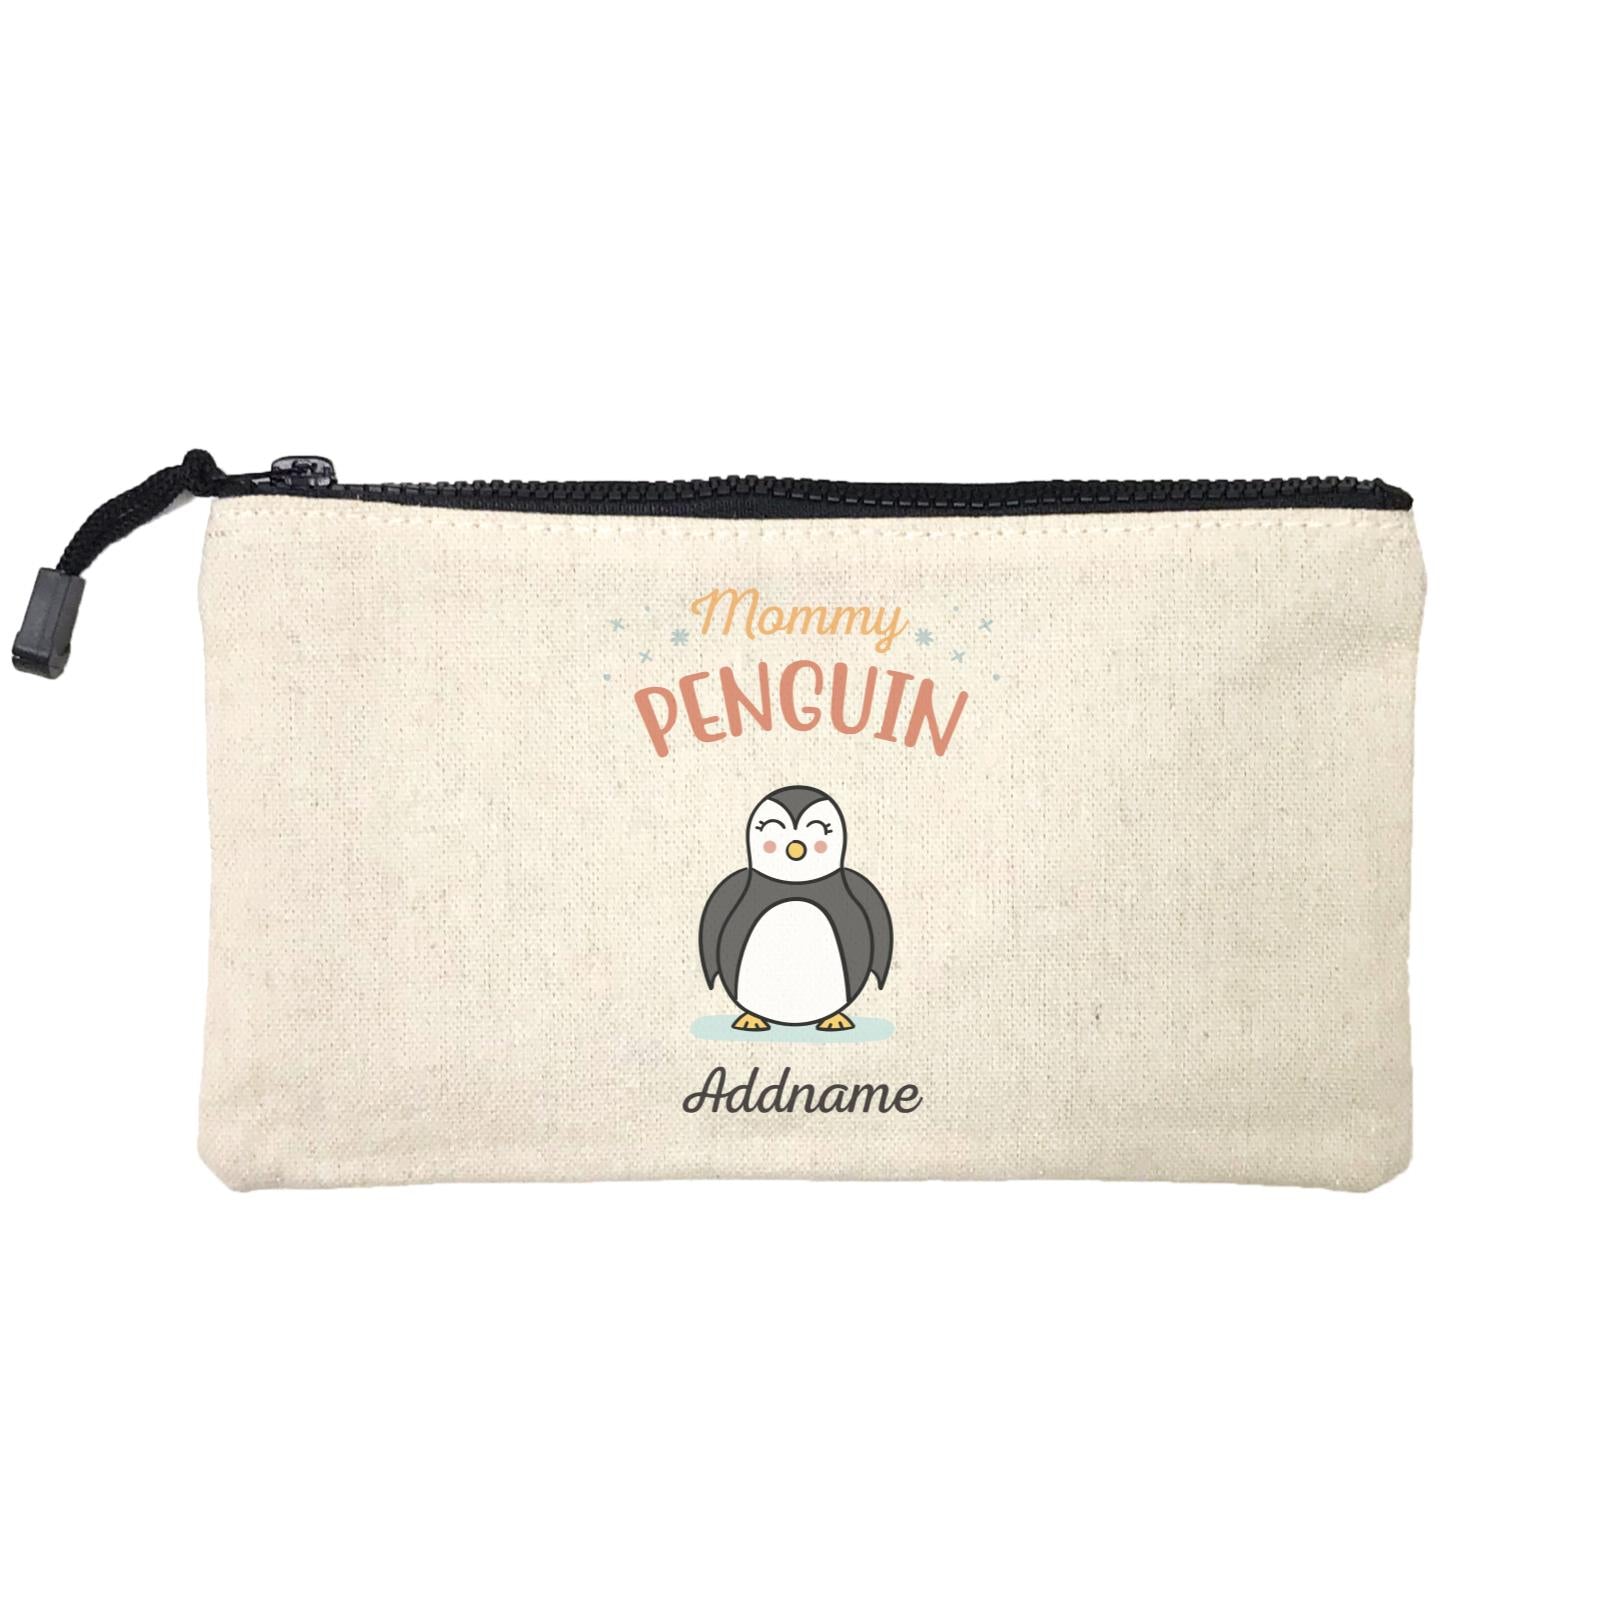 Penguin Family Mommy Penguin Addname Mini Accessories Stationery Pouch